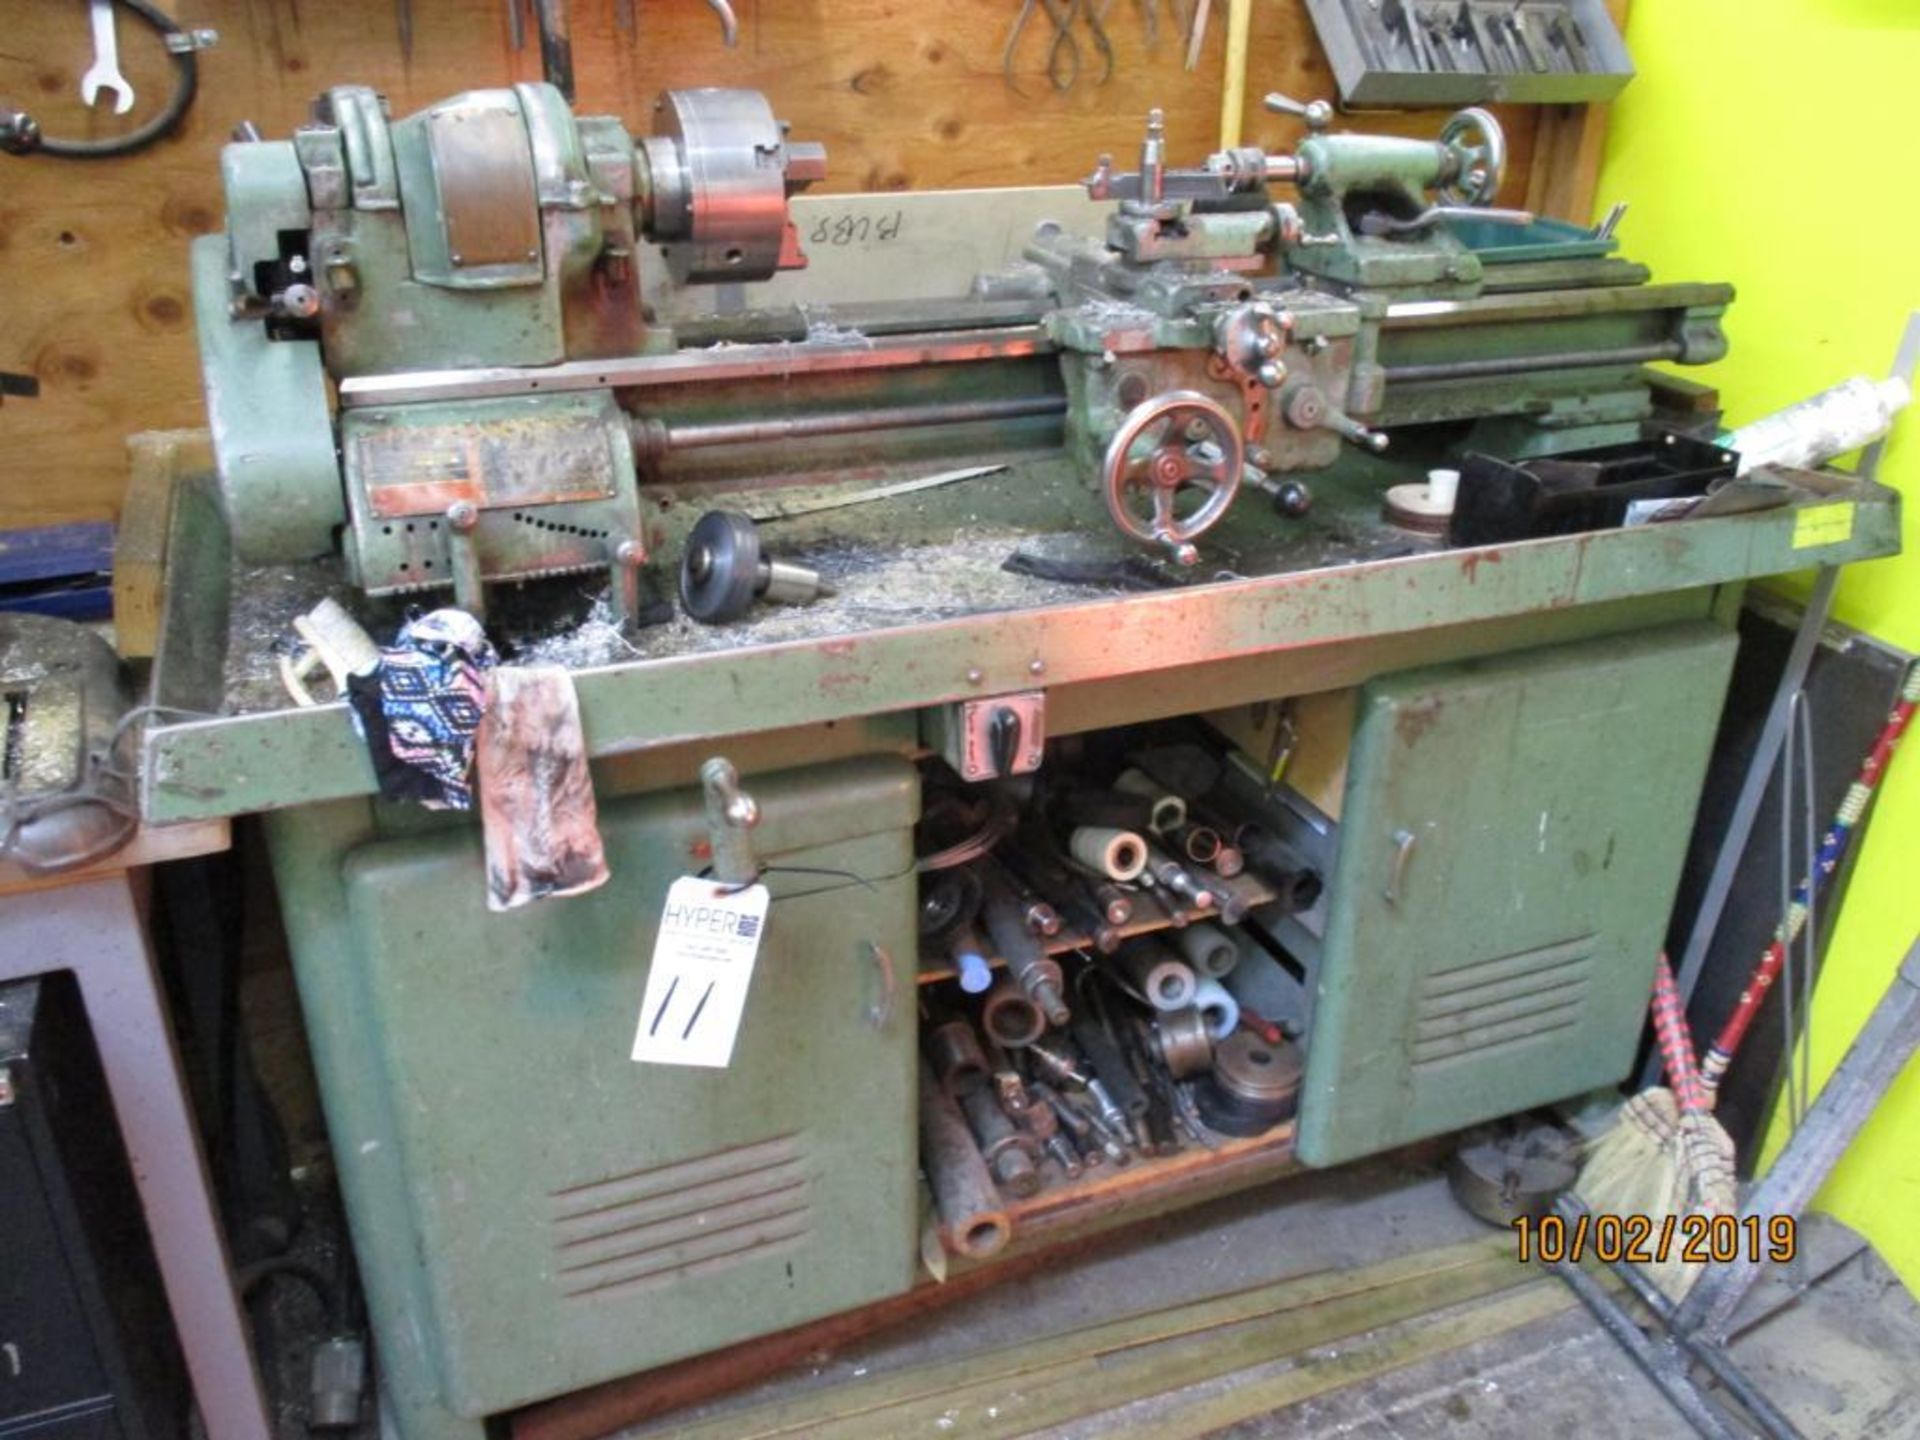 Southbend 10"x4' (est) Cat. No. CL187RB Engine Lathe S/N: 1041RKL14X, 4.5' Bed, 6" Three Jaw Chuck,